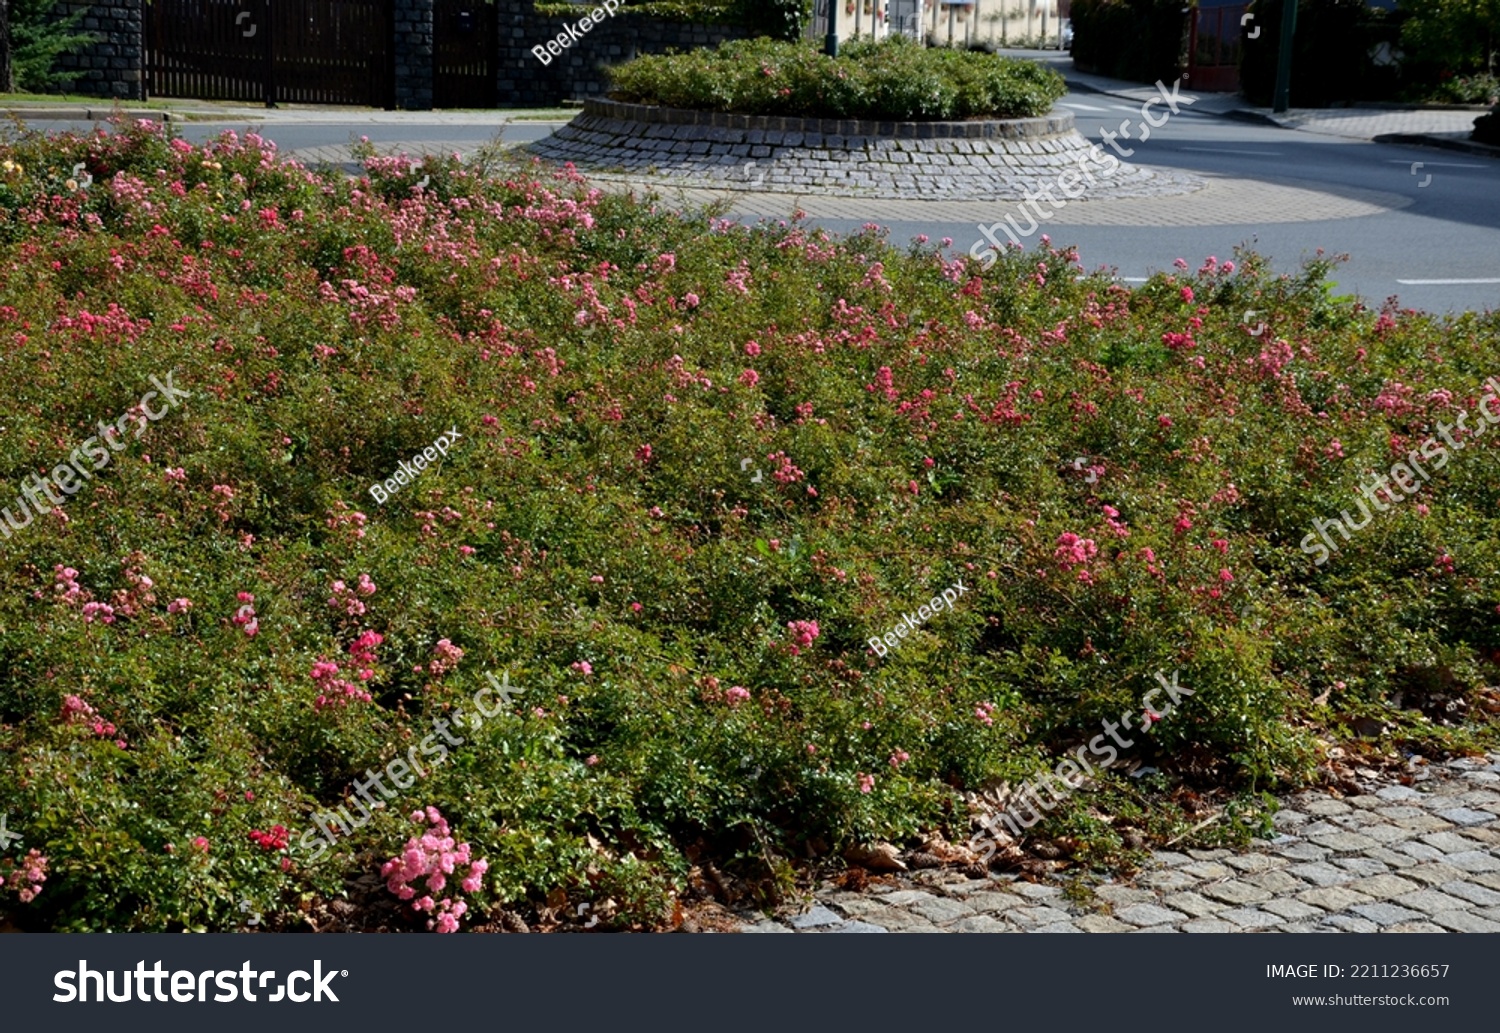 Ground cover roses are characterized by compact low growth. The shoots may be upright at first, but soon spread over the surface and sometimes form longer lying tendrils #2211236657